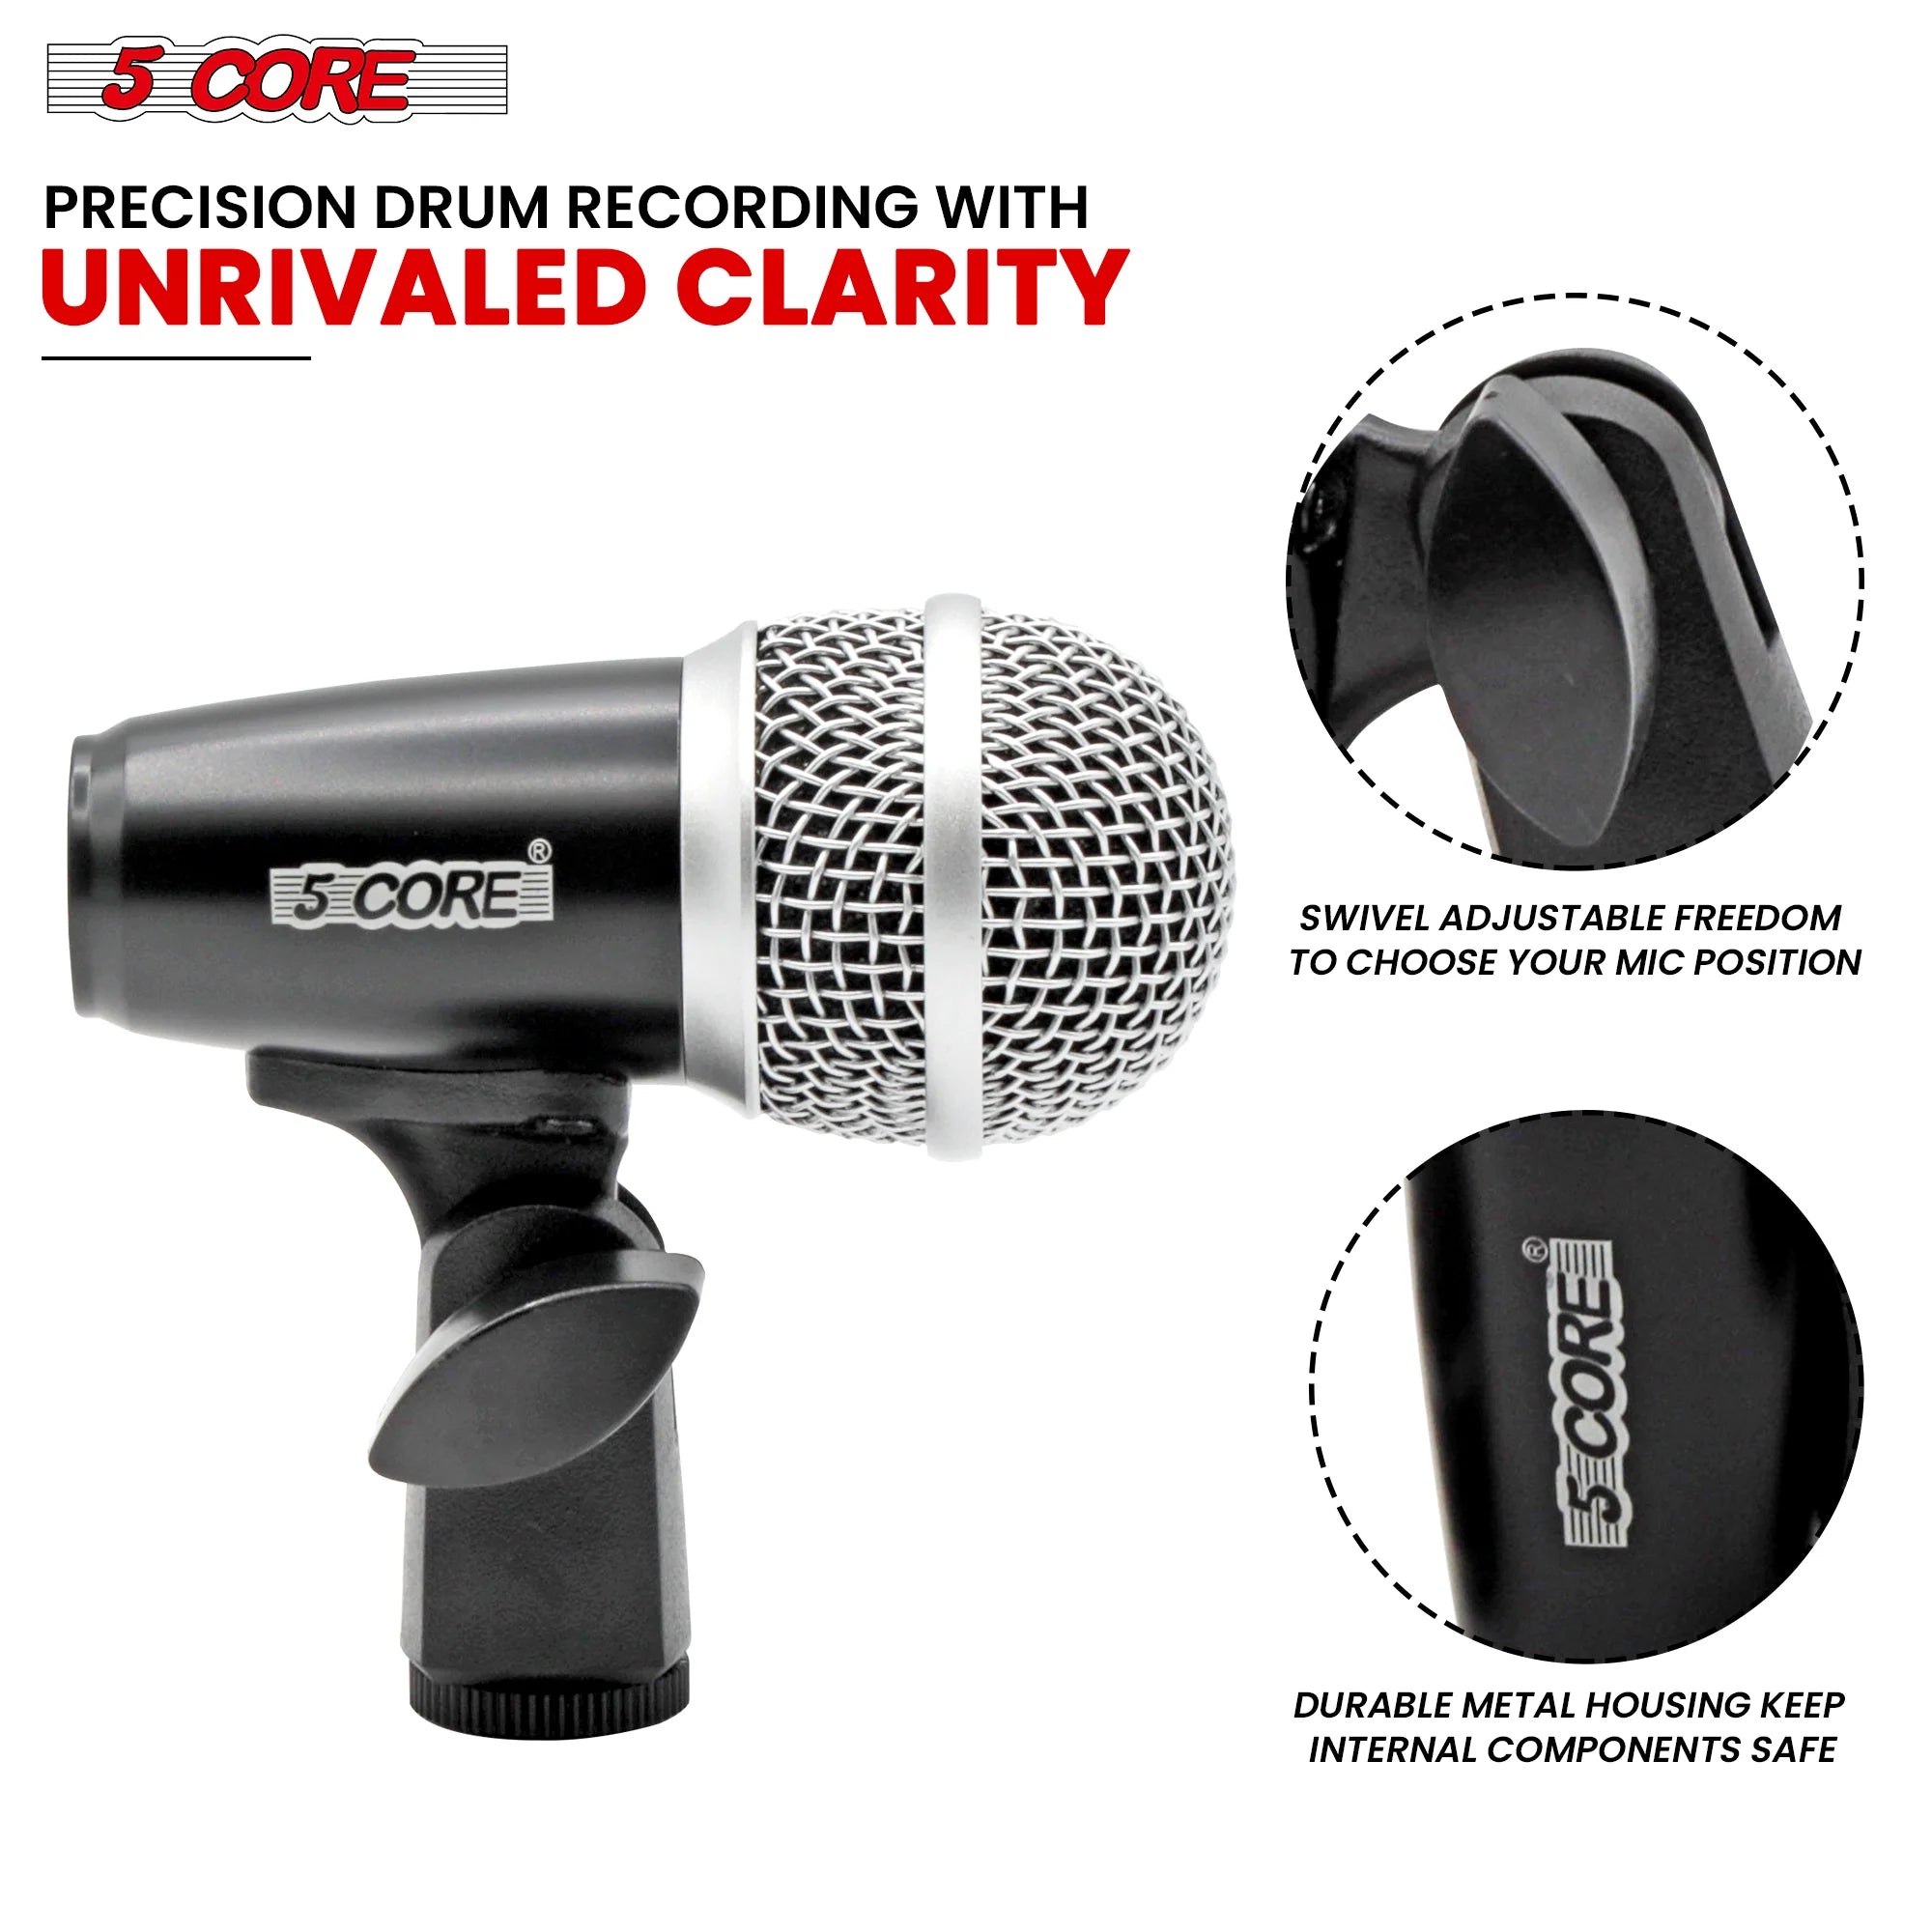 5Core Conga Mic Snare Tom Cardioid Dynamic Microphone for Drummer Precision Instrument